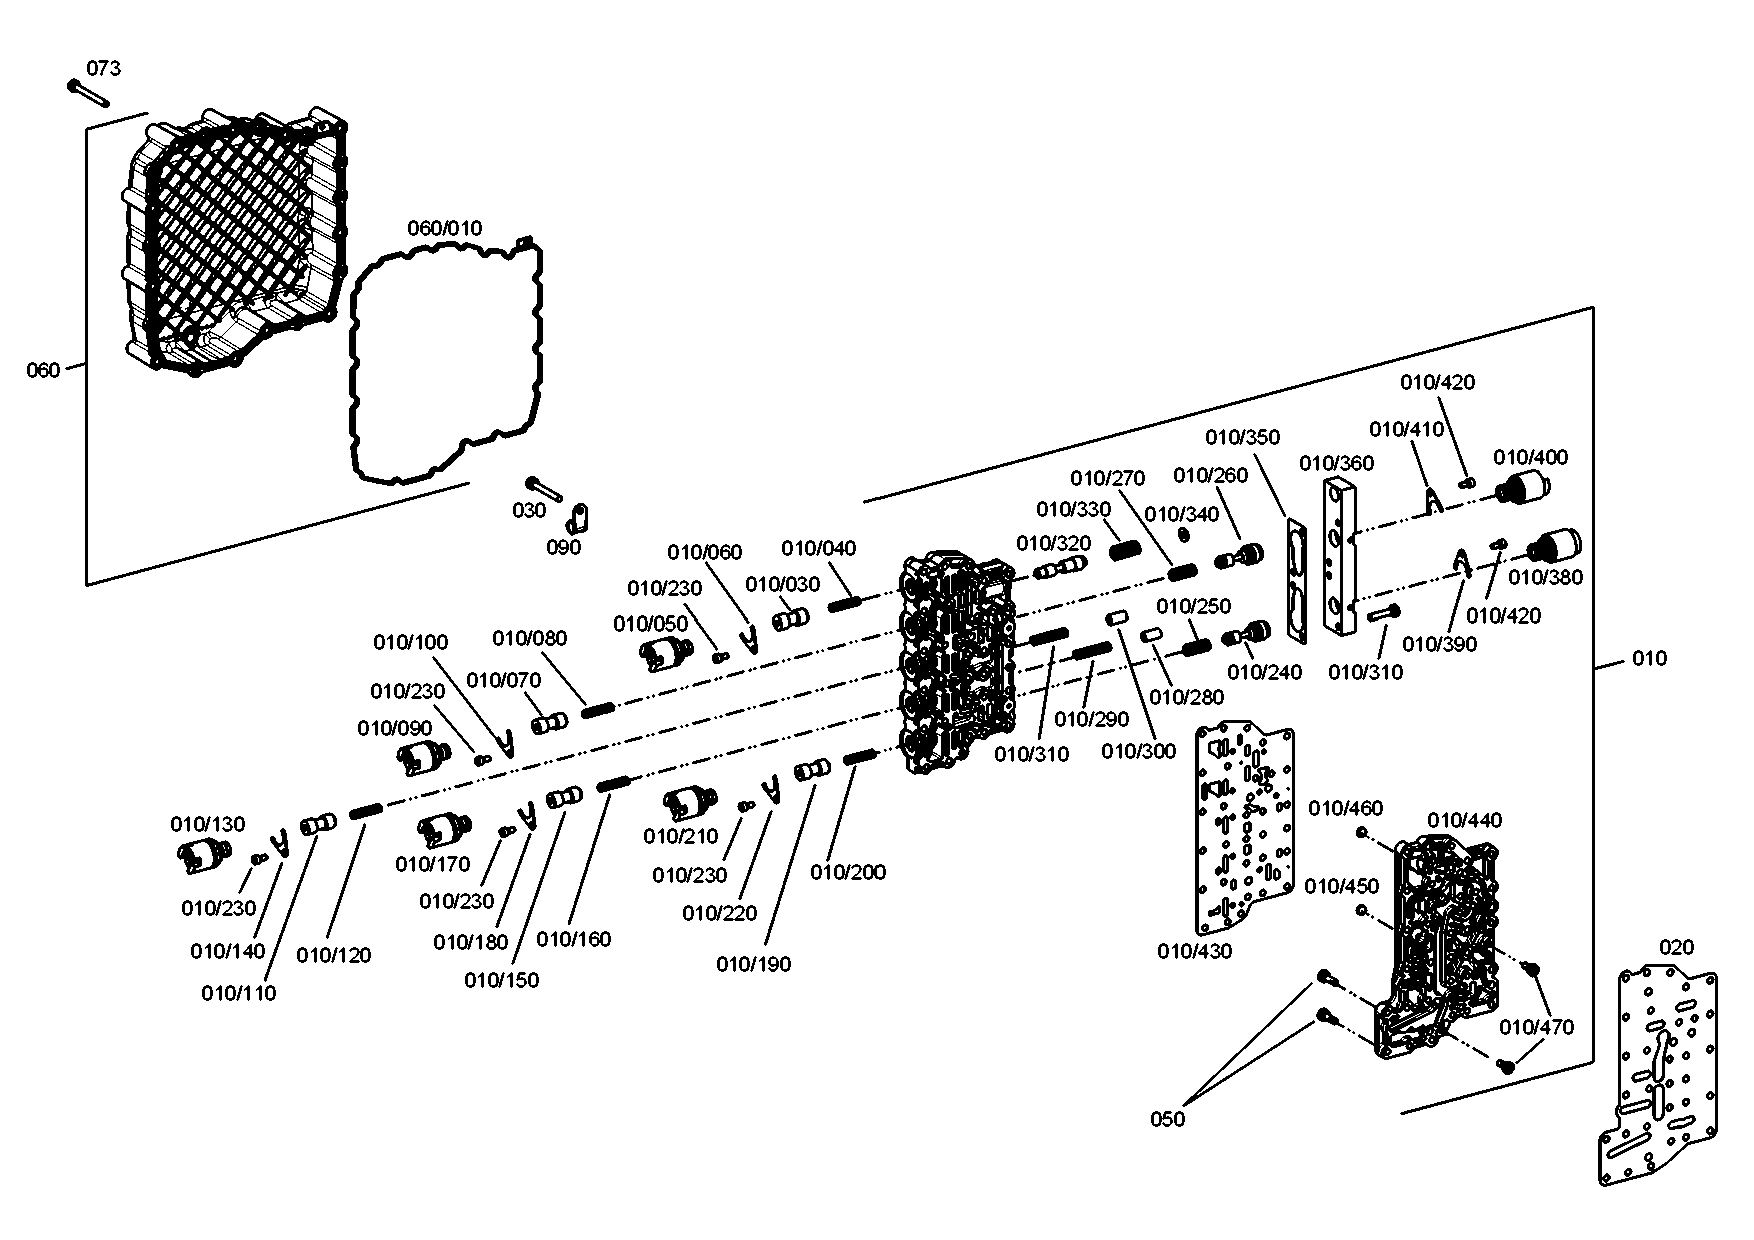 drawing for AGCO F824100090540 - FIXING PLATE (figure 5)